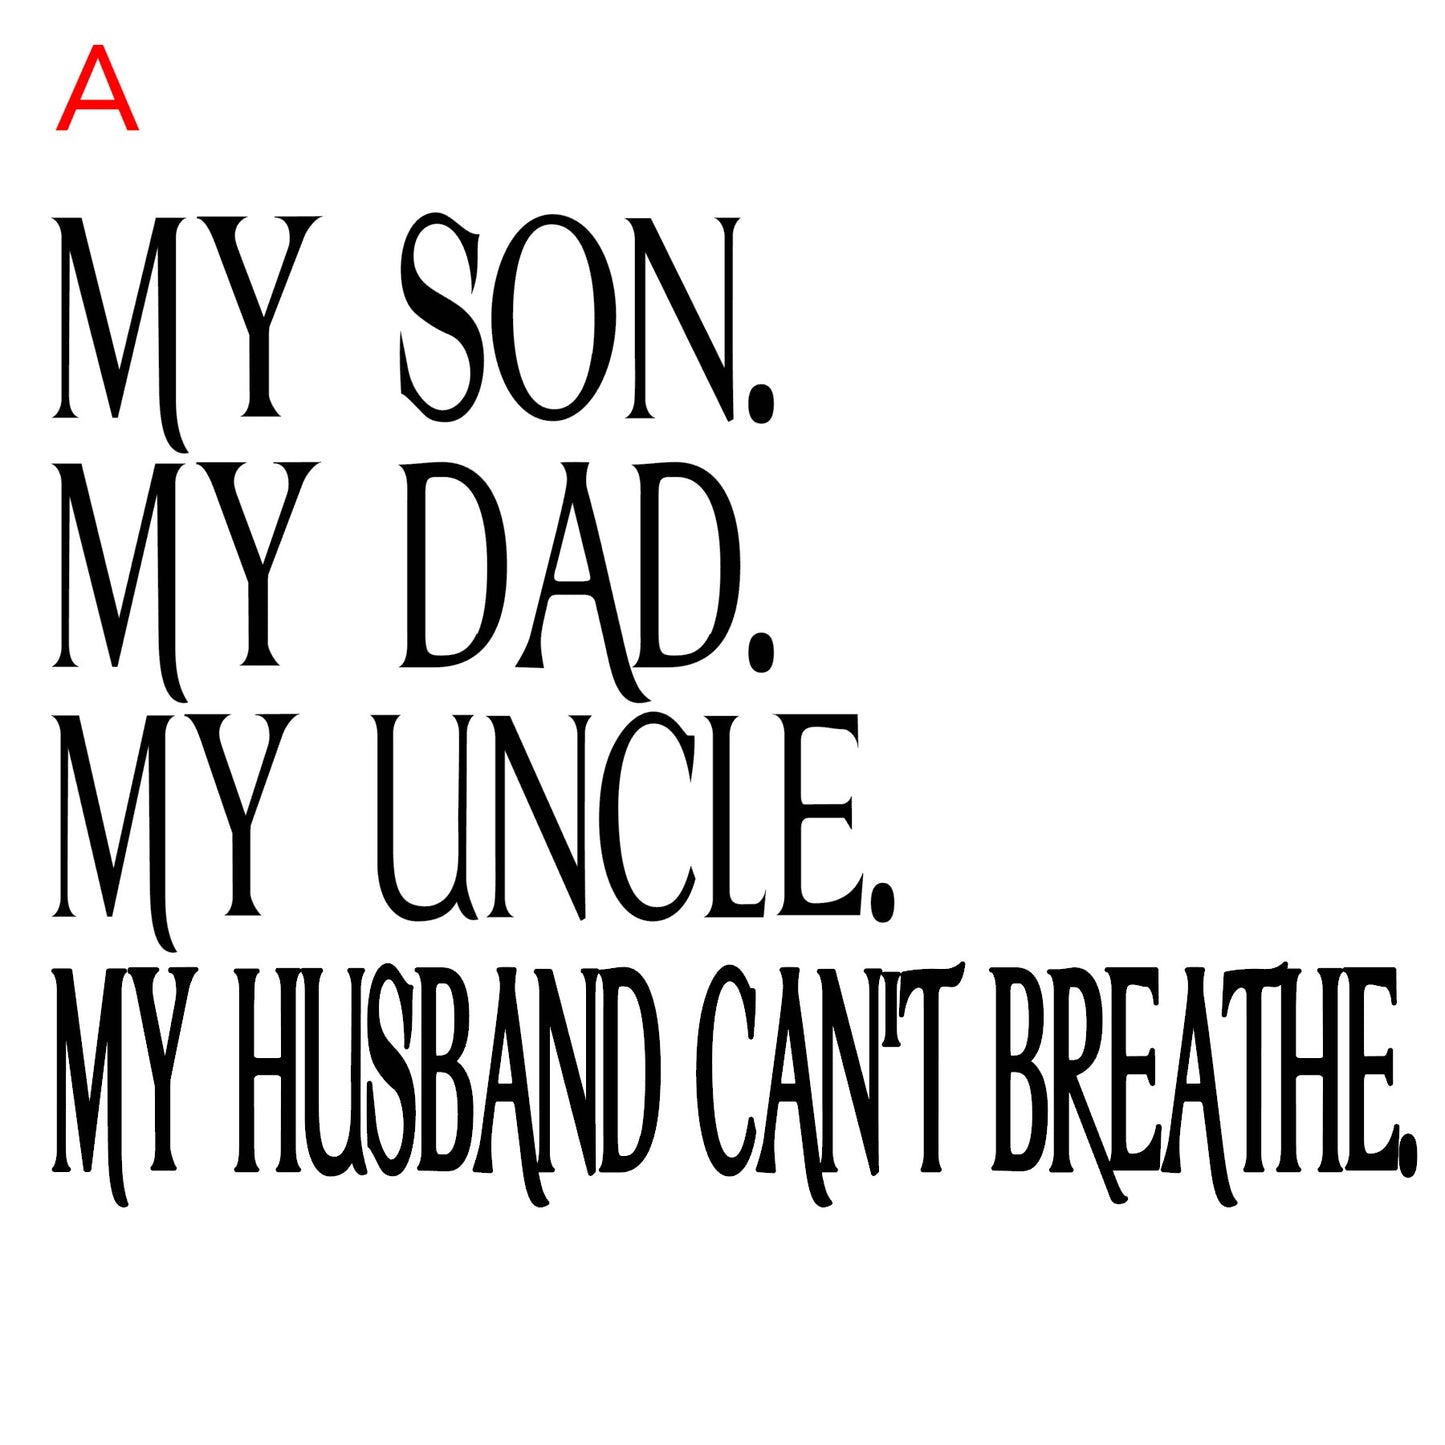 MY SON/MY DAD/MY UNCLE/MY HUSBAND CAN'T BREATHE (Comments:  Woman (A) or Man (B)  for design selection).)